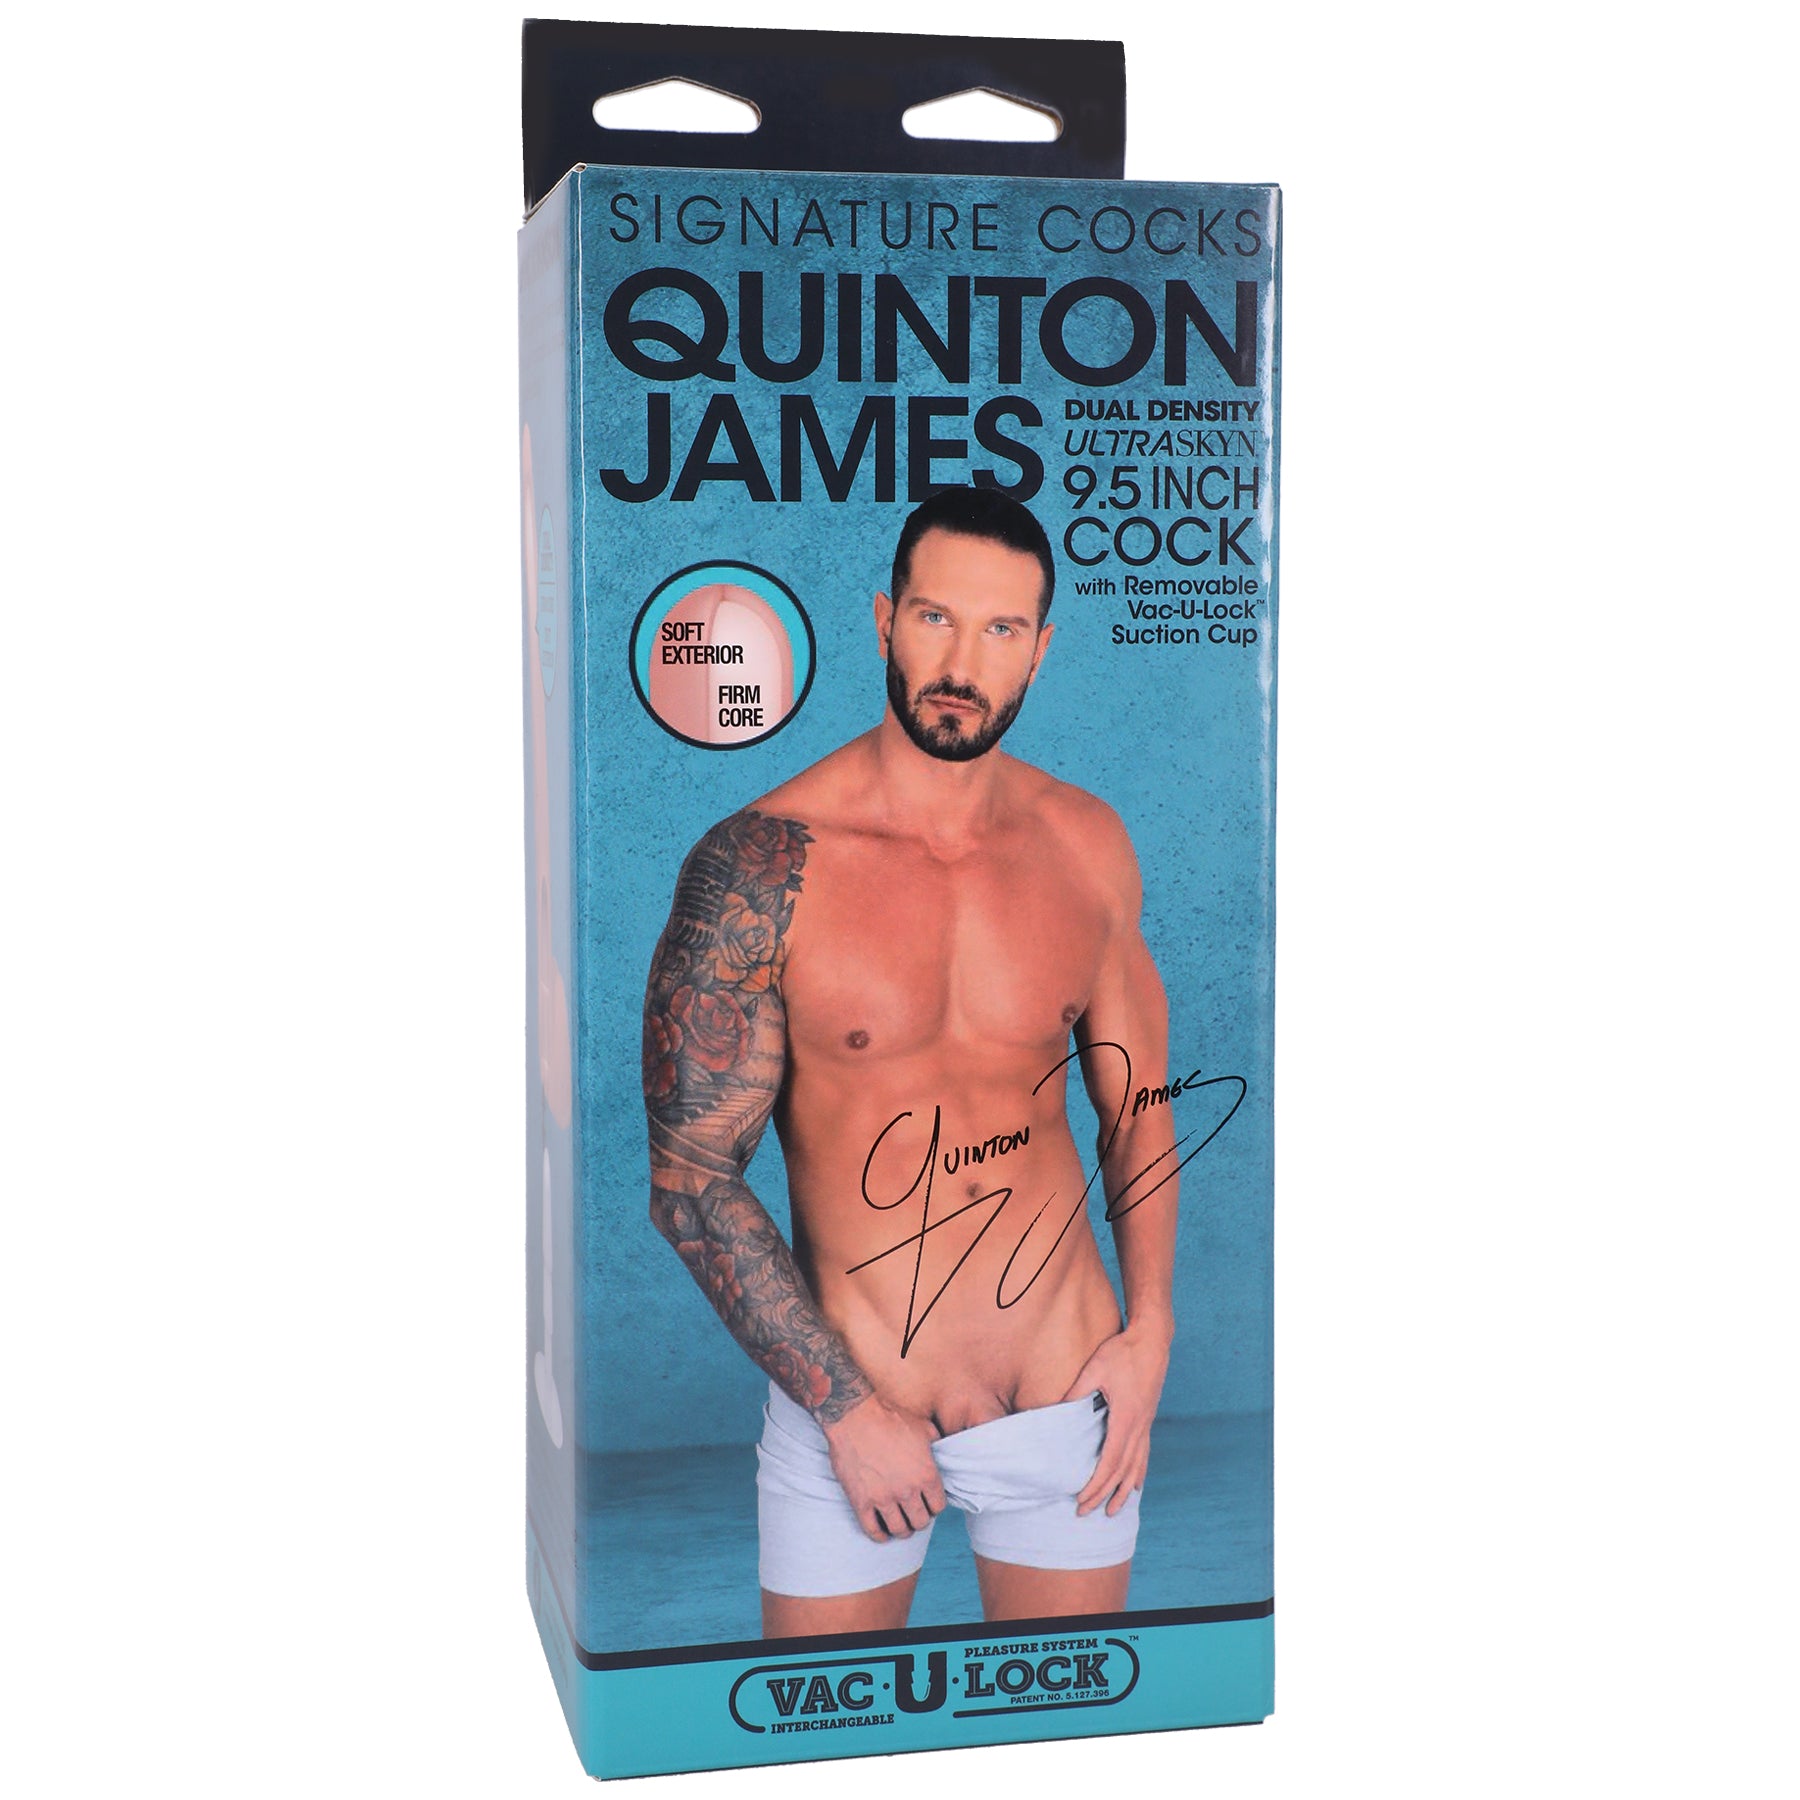 Signature Cocks - Quinton James - 9.5 Inch  Ultraskyn Cock With Removable Vac-U-Lock  Suction Cup-5